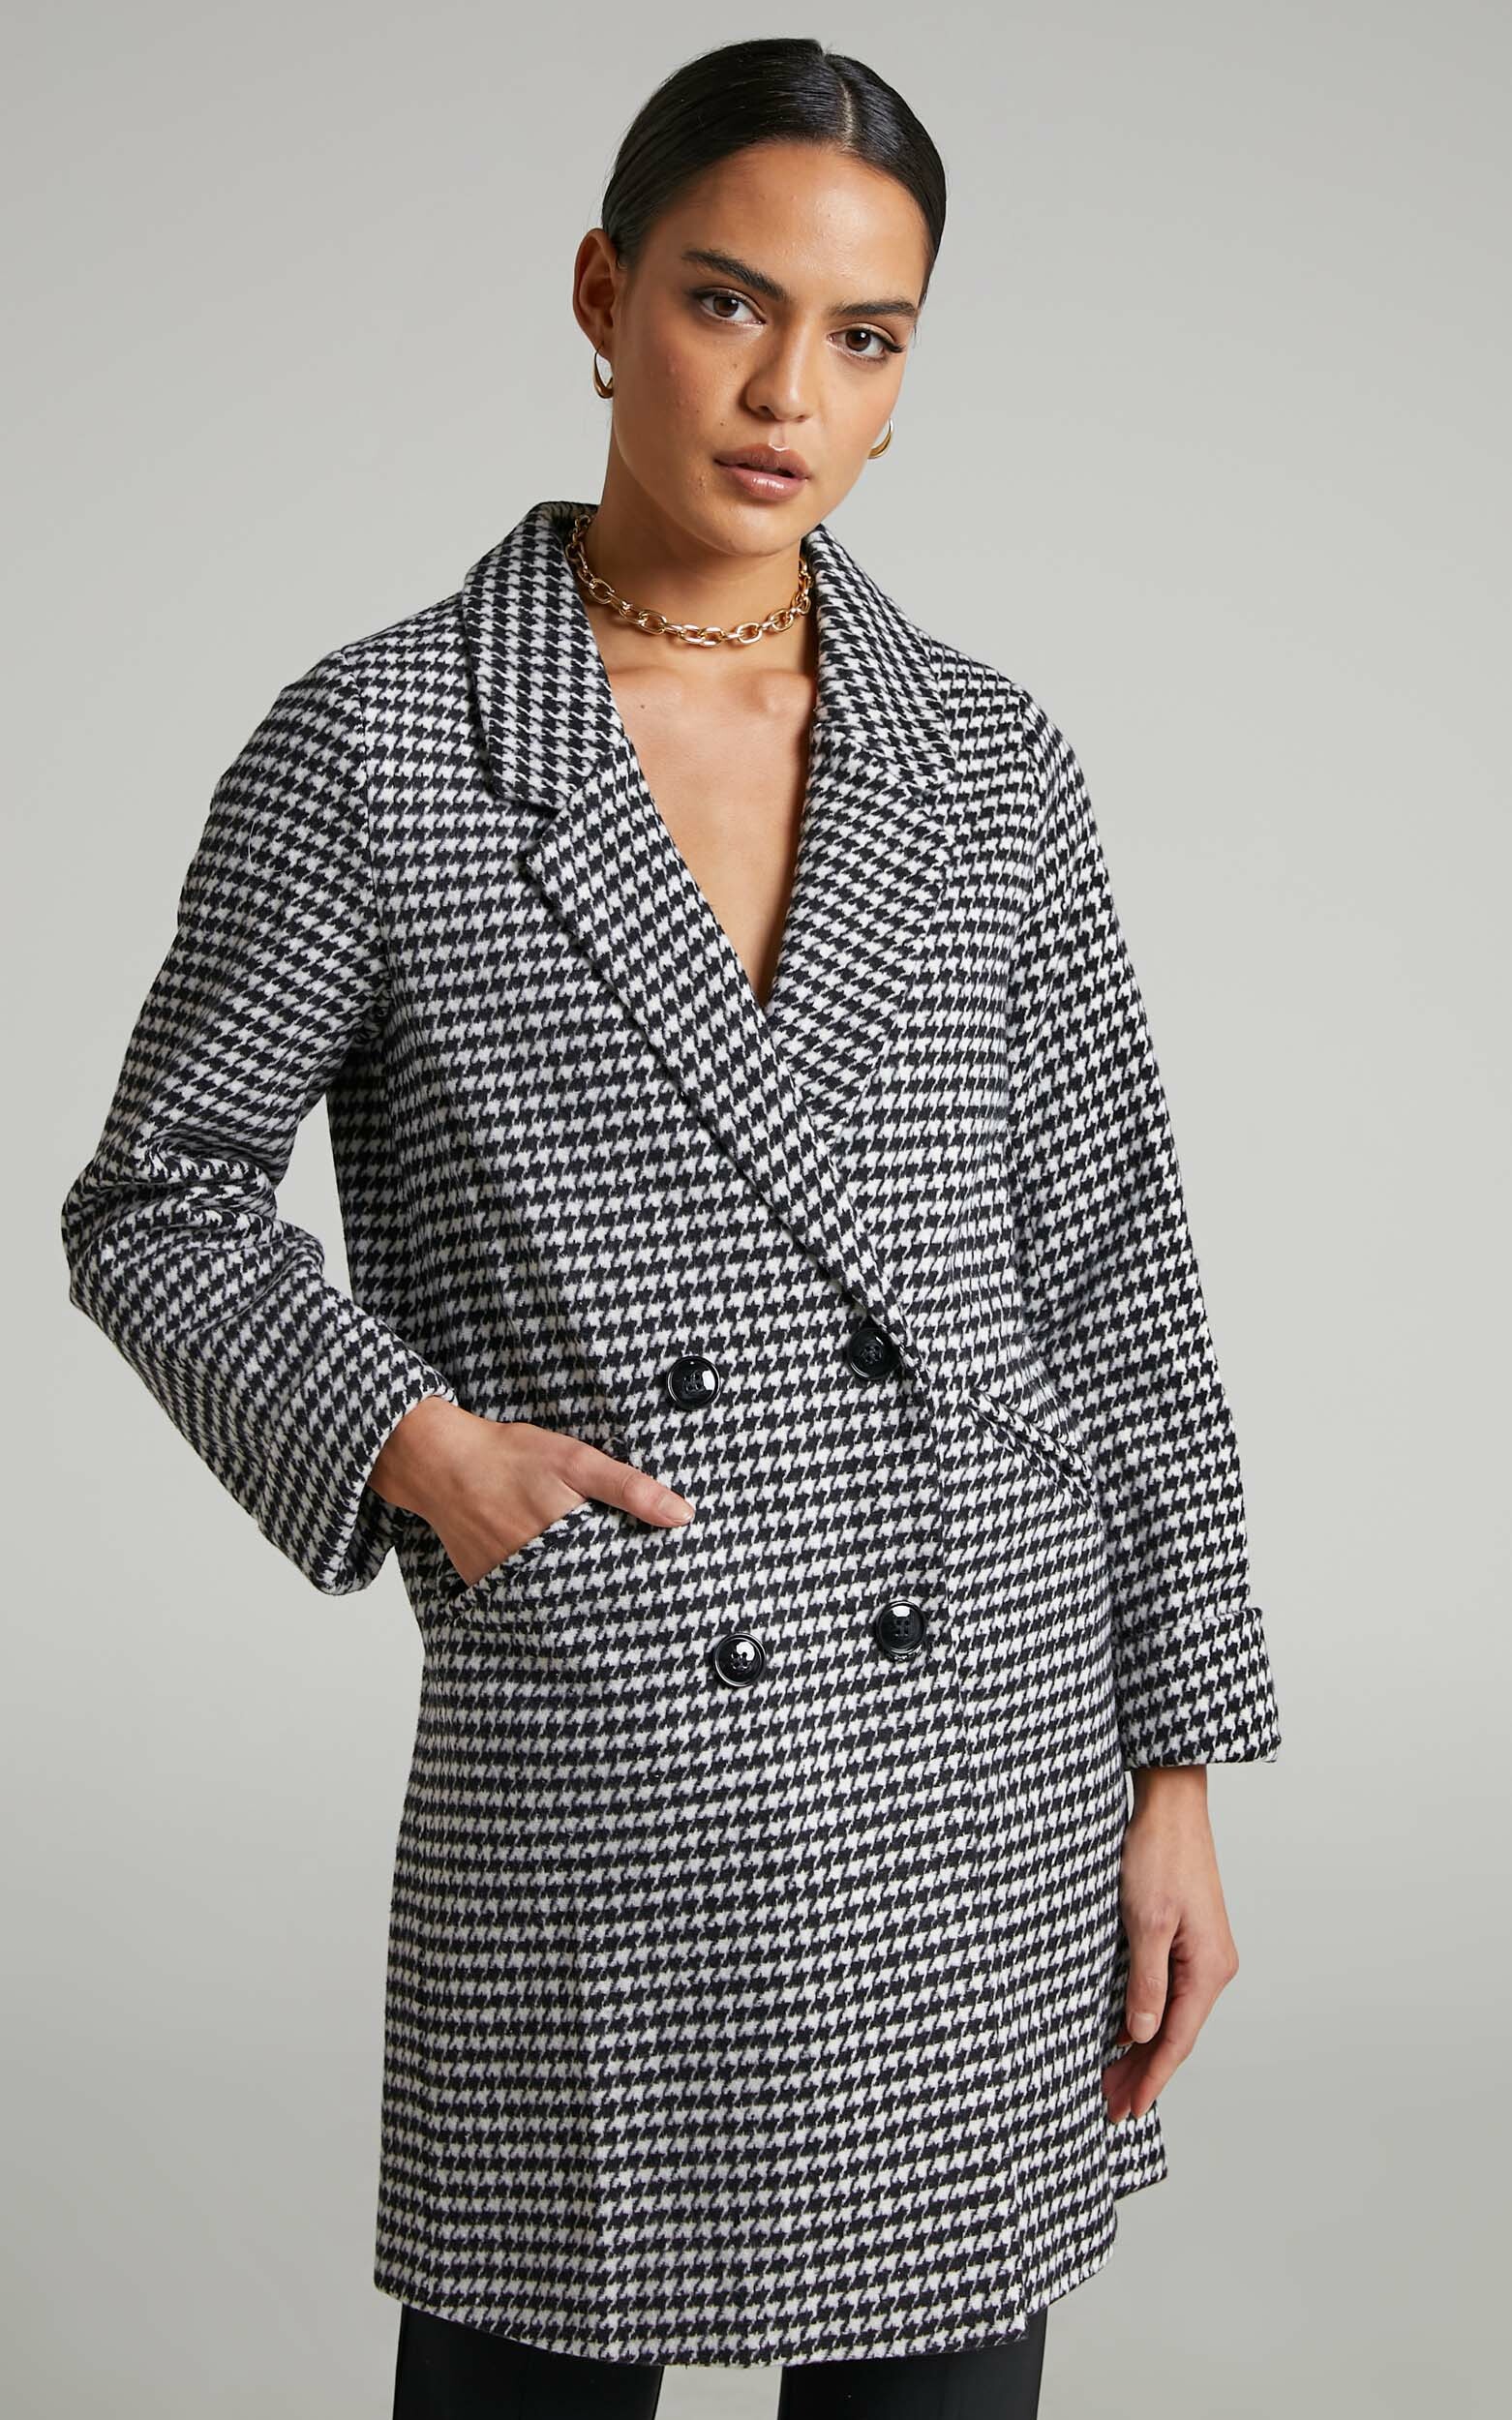 Hermeena Double Breasted Longline Coat in Black/White check - L, BLK1, hi-res image number null